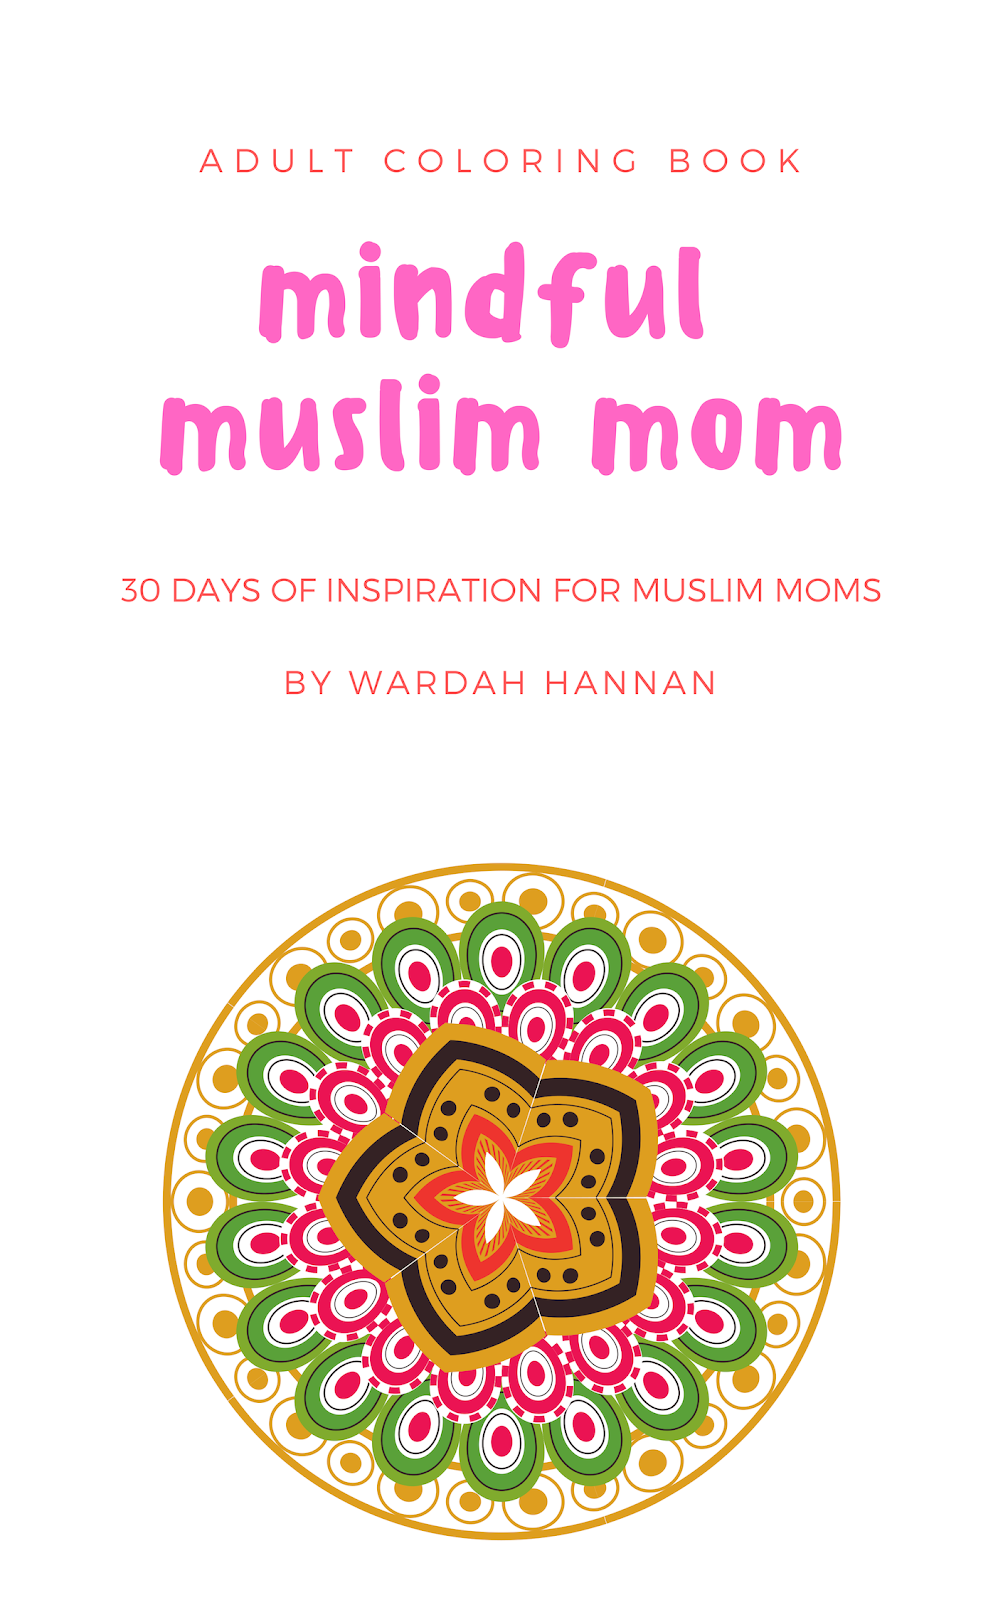 Mindful Muslim Mom Adult Coloring Book 30 Days of Inspiration for New Moms